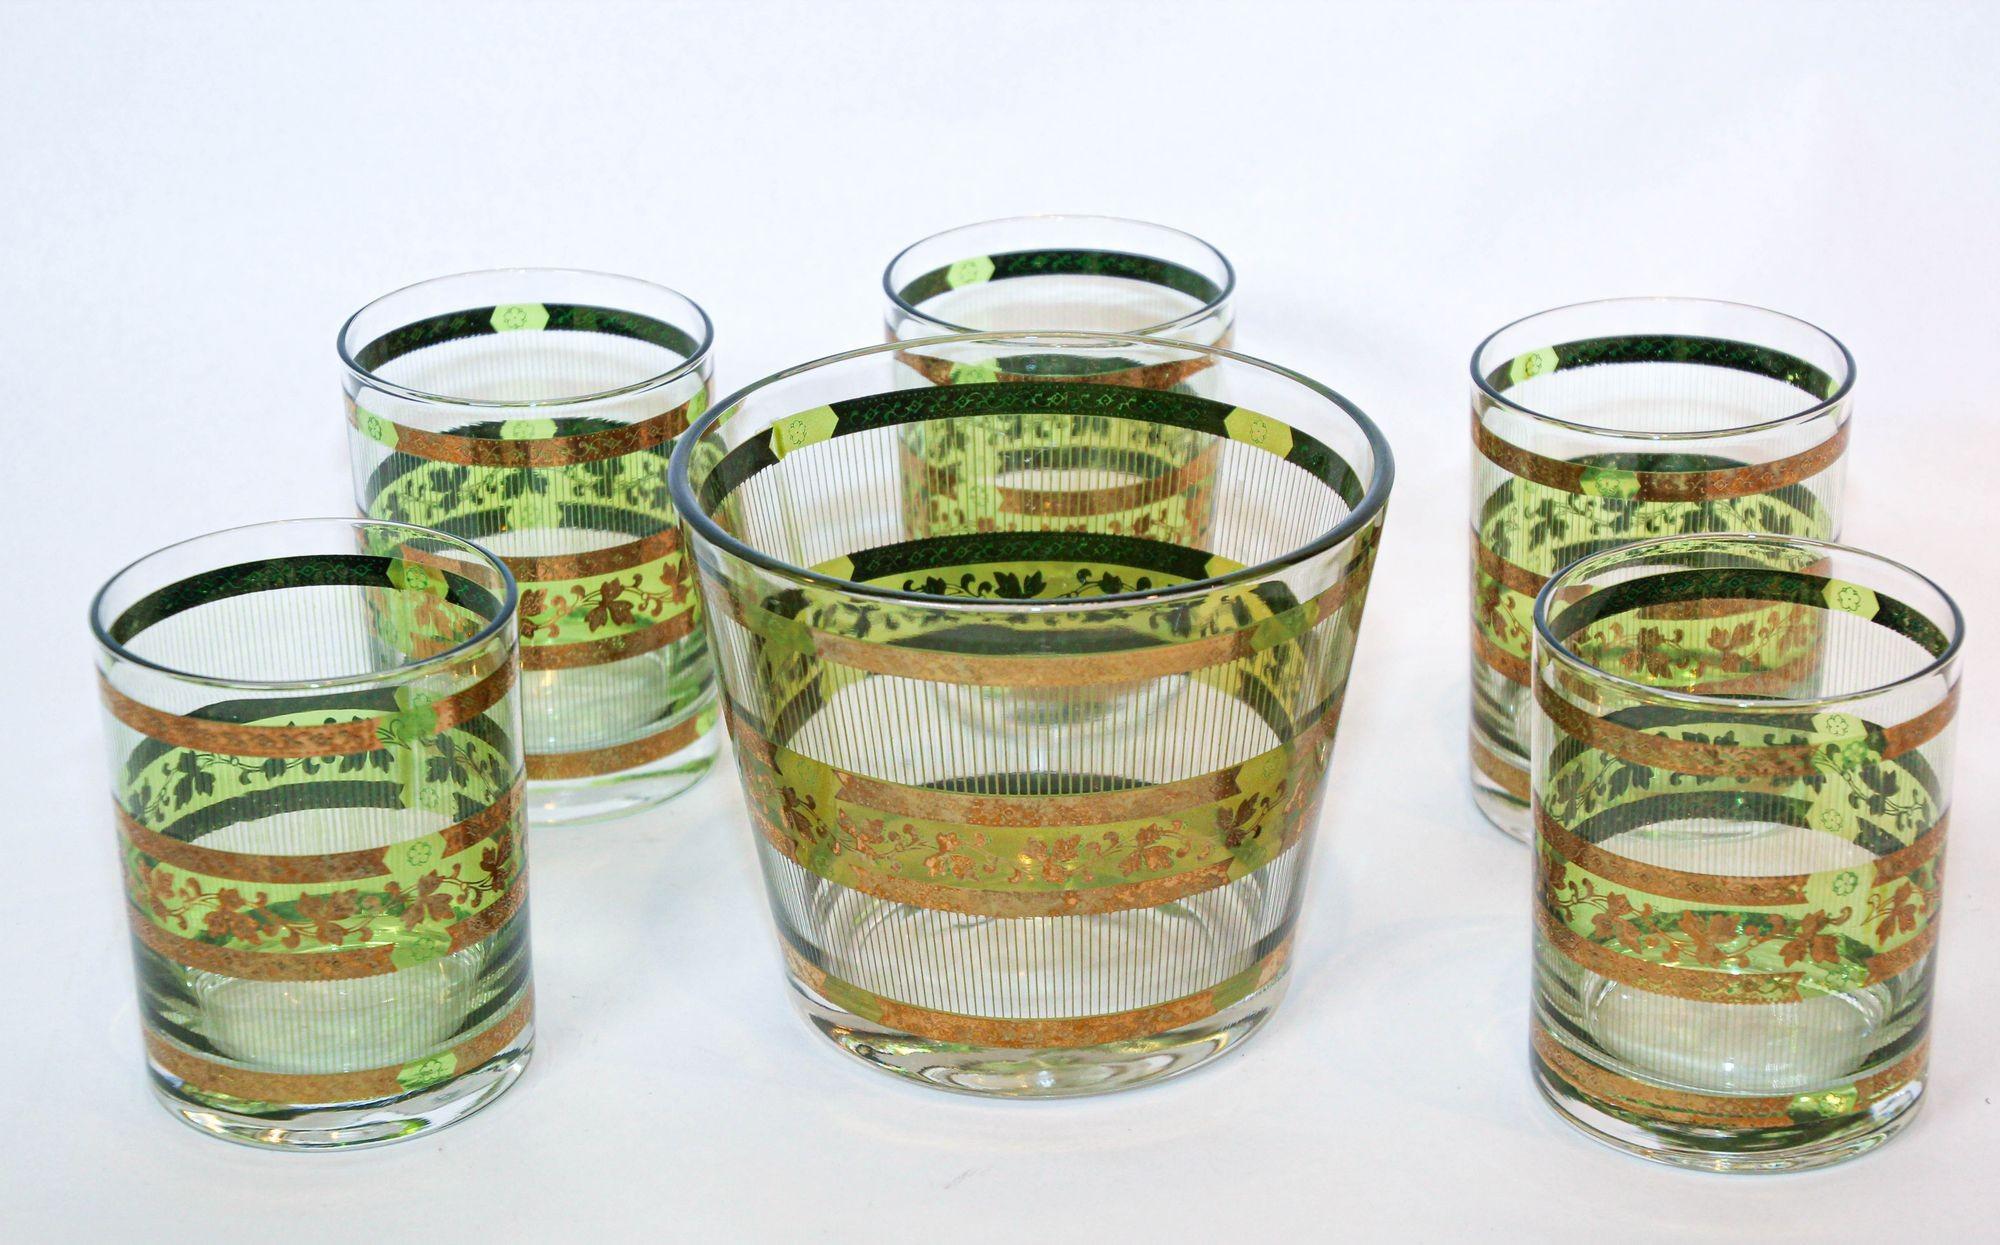 VINTAGE Bar Glasses Set Of 6 Green Glass With Gold Made In Korea